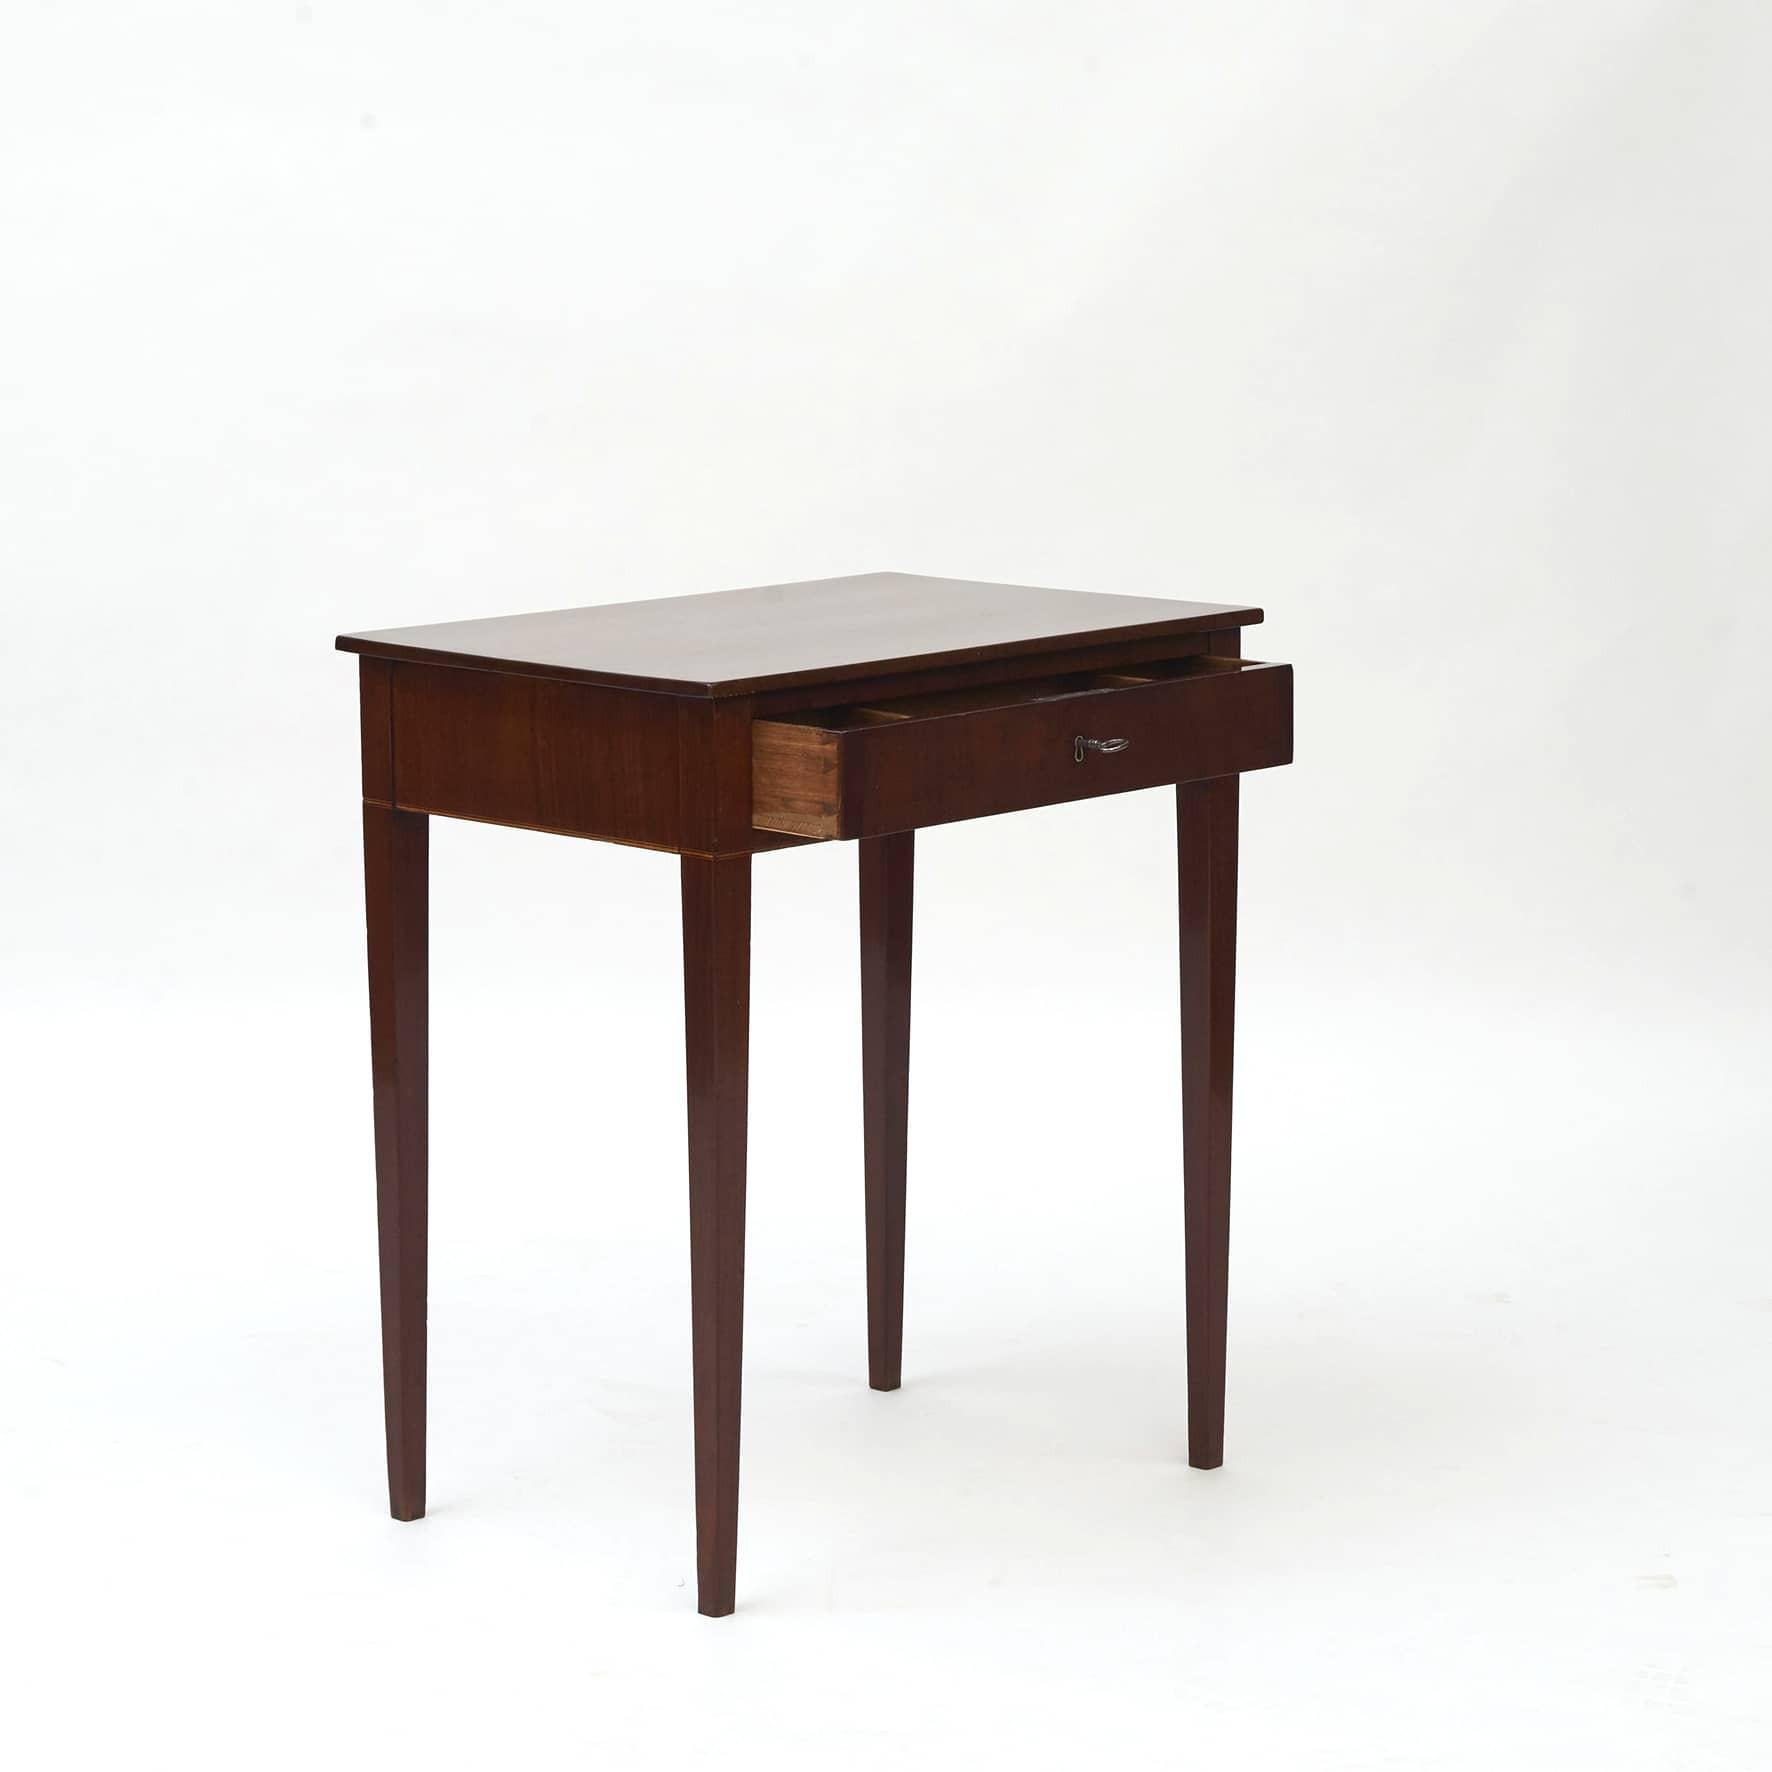 Elegant empire side table in Cuban mahogany.
Rectangular top with satin wood marquetry trim to the apron.
One drawer with original lock and key.

Copenhagen c. 1810.